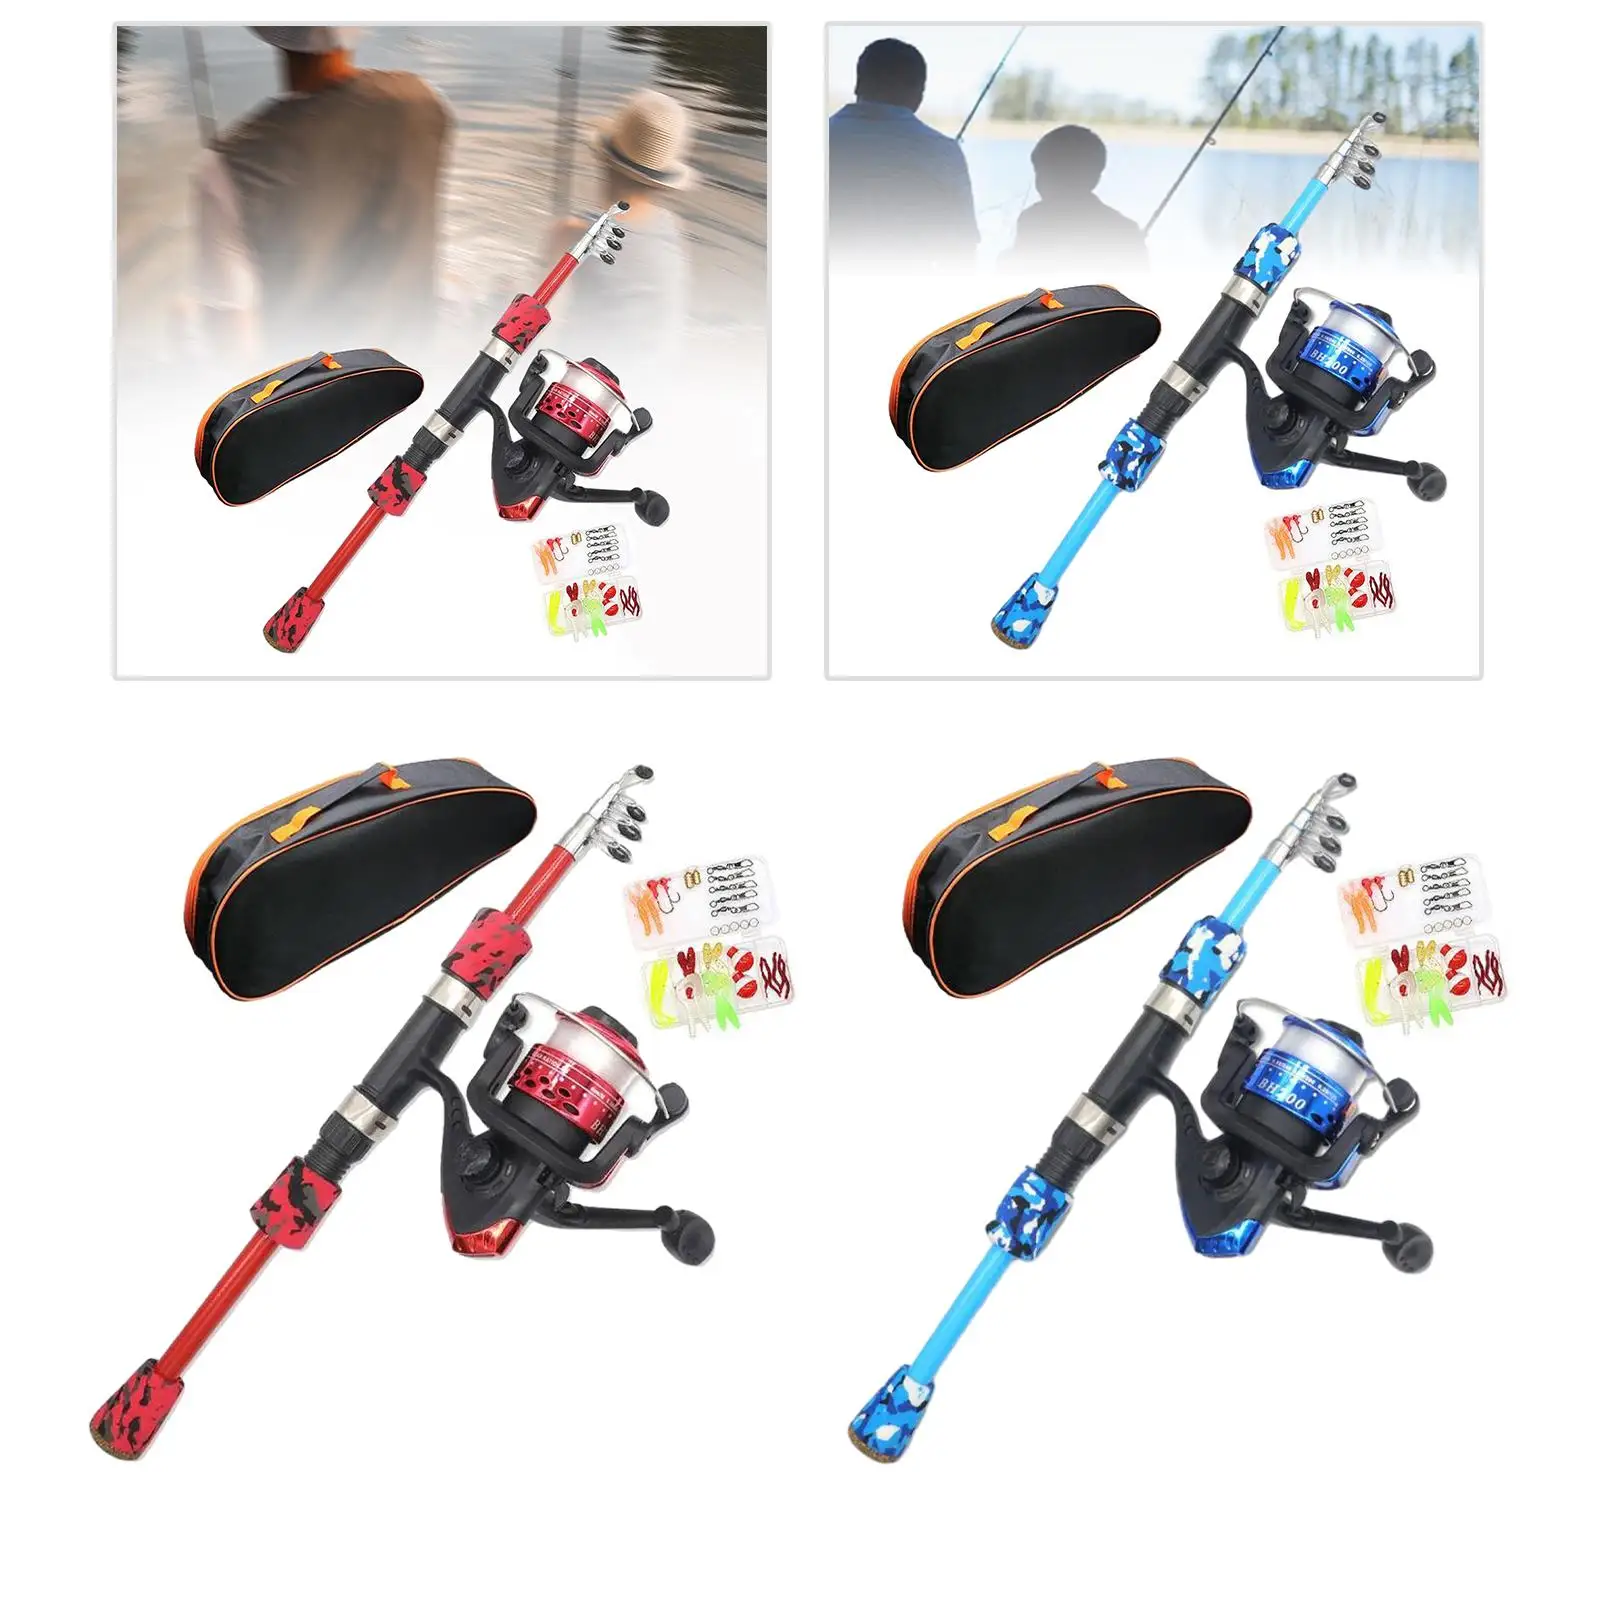 Kids Fishing Rod and Reel Combo with Carry Bag for Freshwater with Fishing Reel Travel Kid Fishing Pole for Boys Girls Beginners